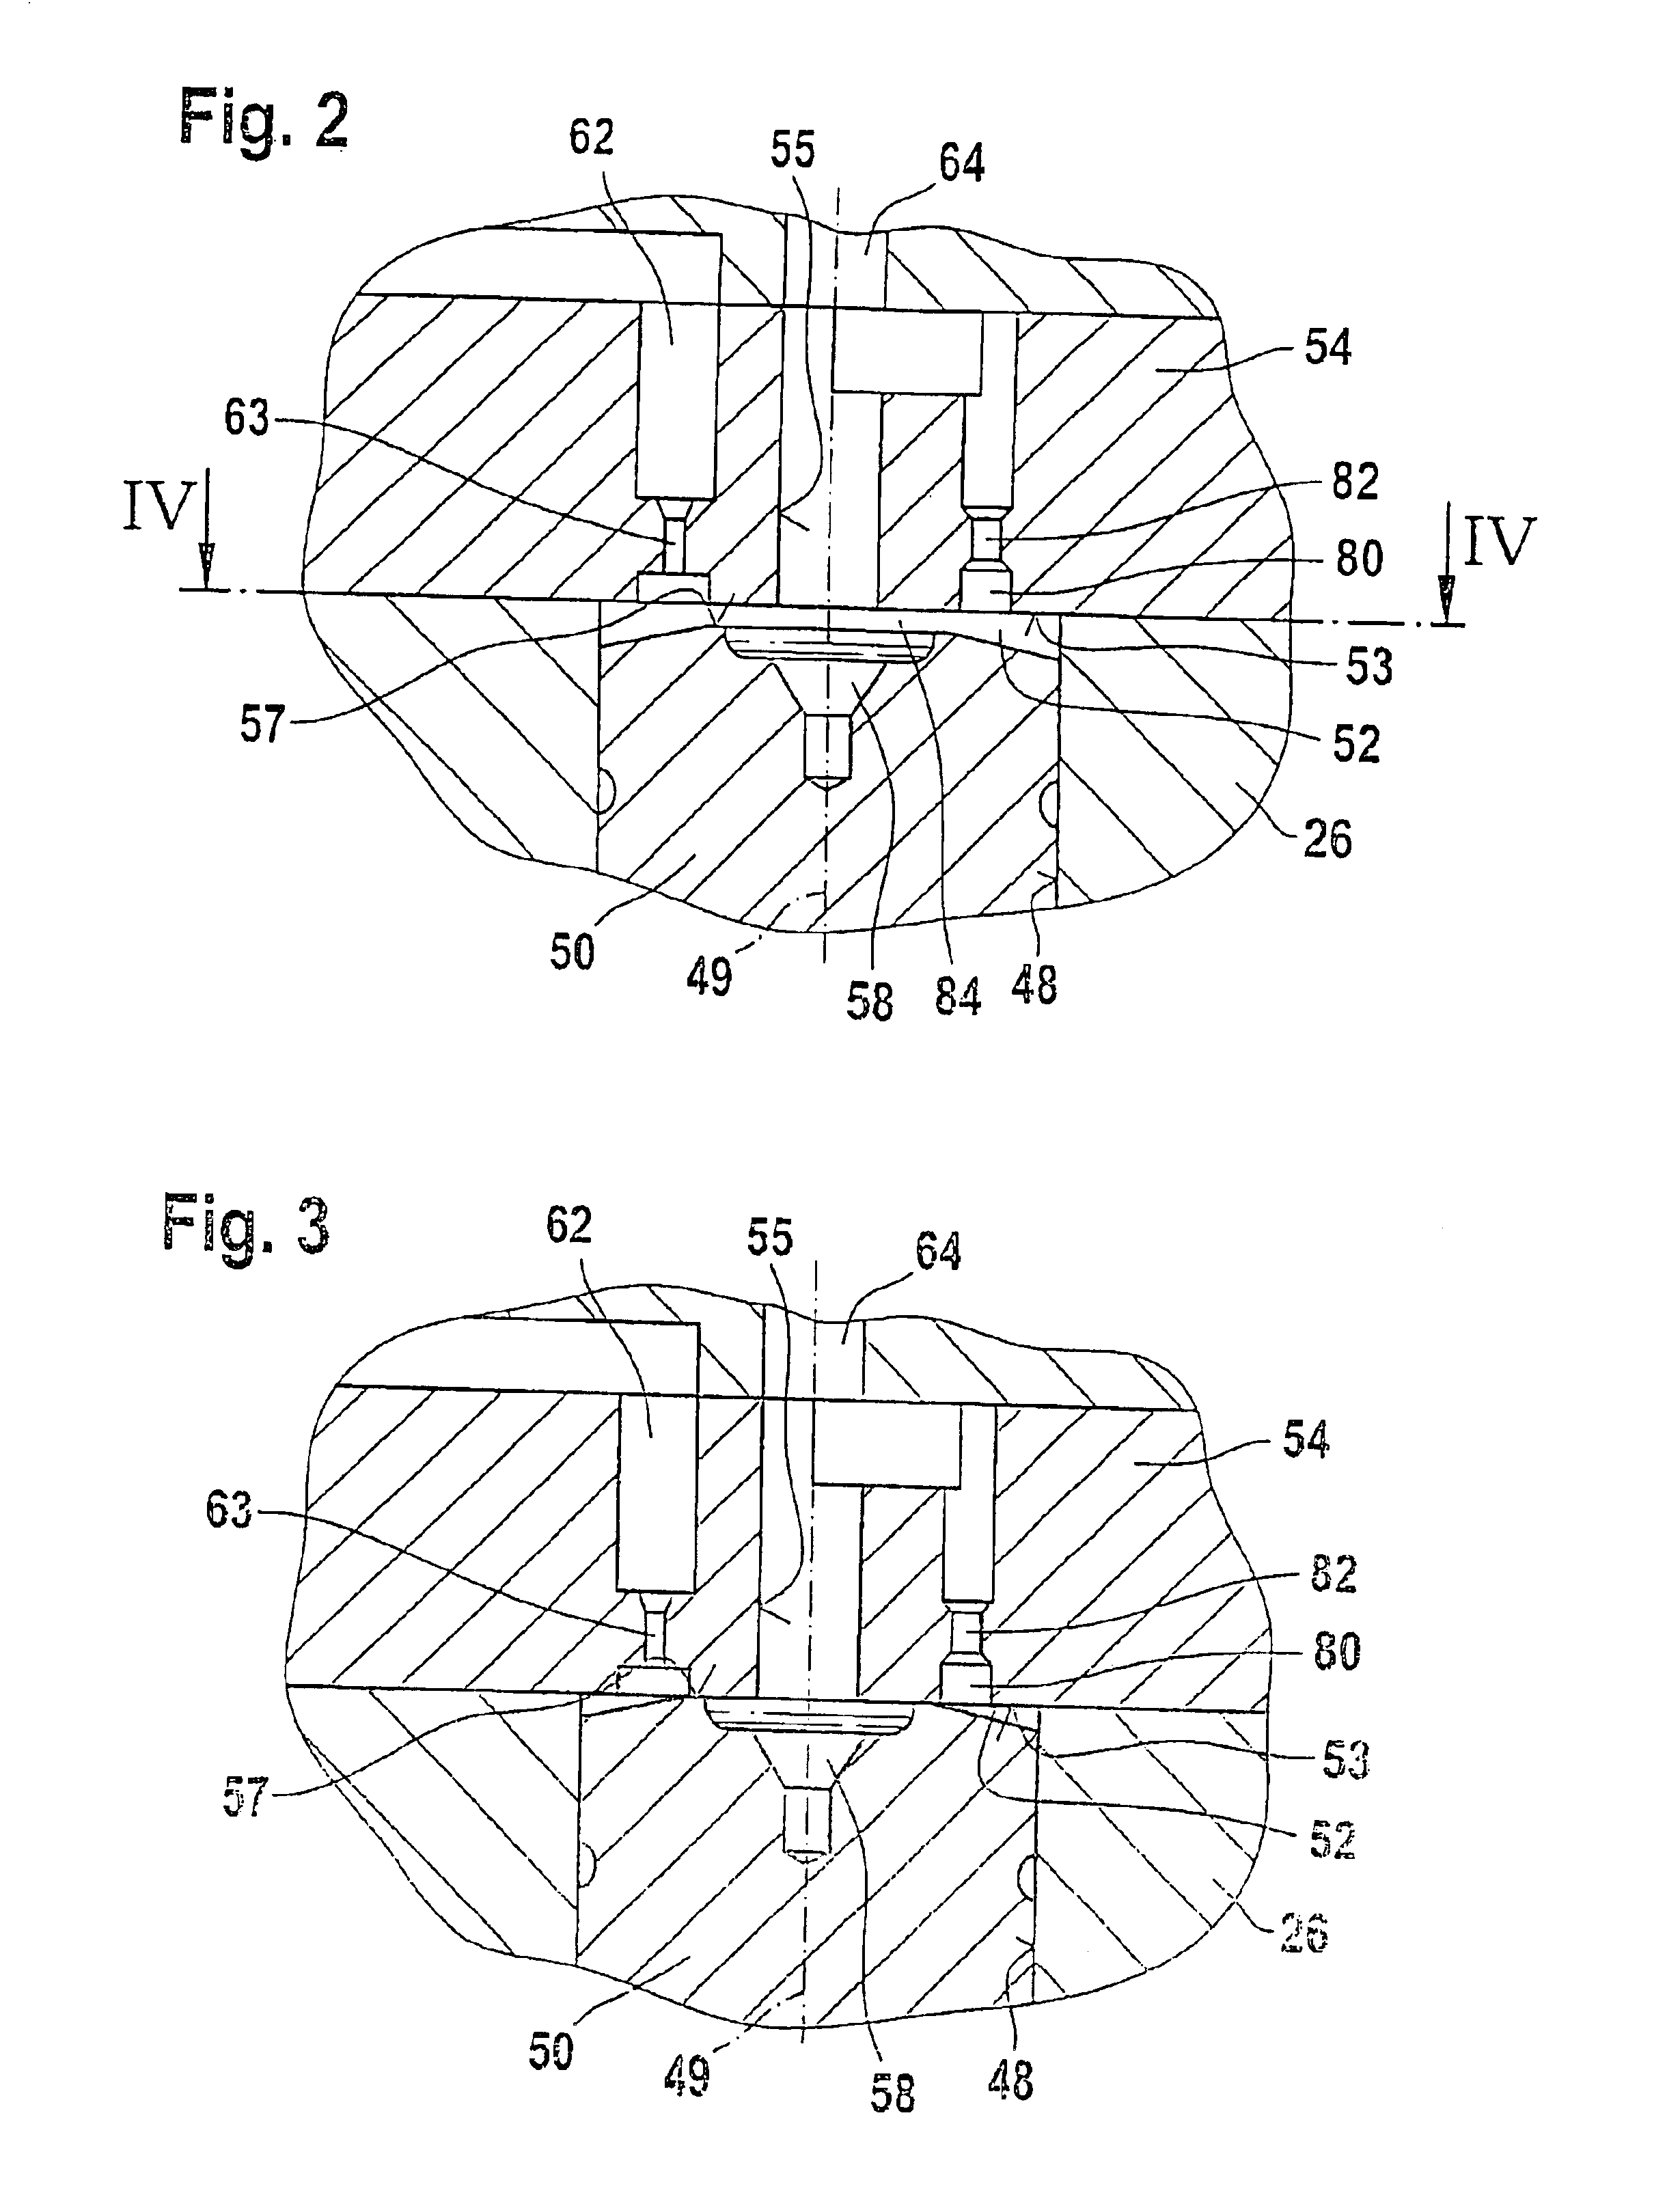 Fuel injection device for an internal combustion engine